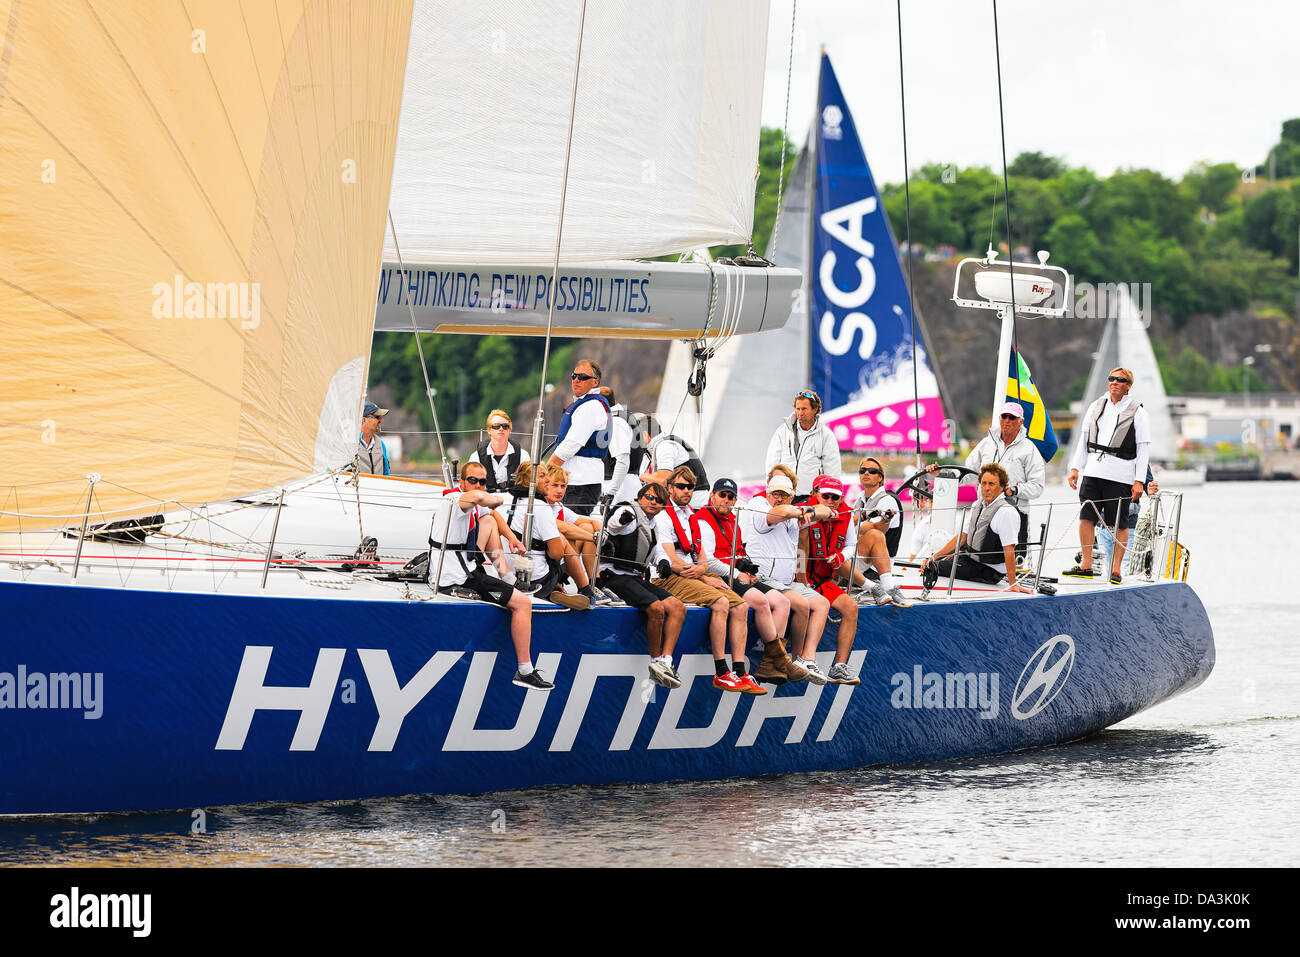 Stockholm, Sweden. 30th June, 2013. Sailboat Hyundai close to shore with crew and sailboat SCA in background departs from Stockholm in the ÅF Offshore Race (Gotland runt) class SRS A, June 30, 2013 in Stockholm, Sweden © Stefan Holm/Alamy Live News Stock Photo